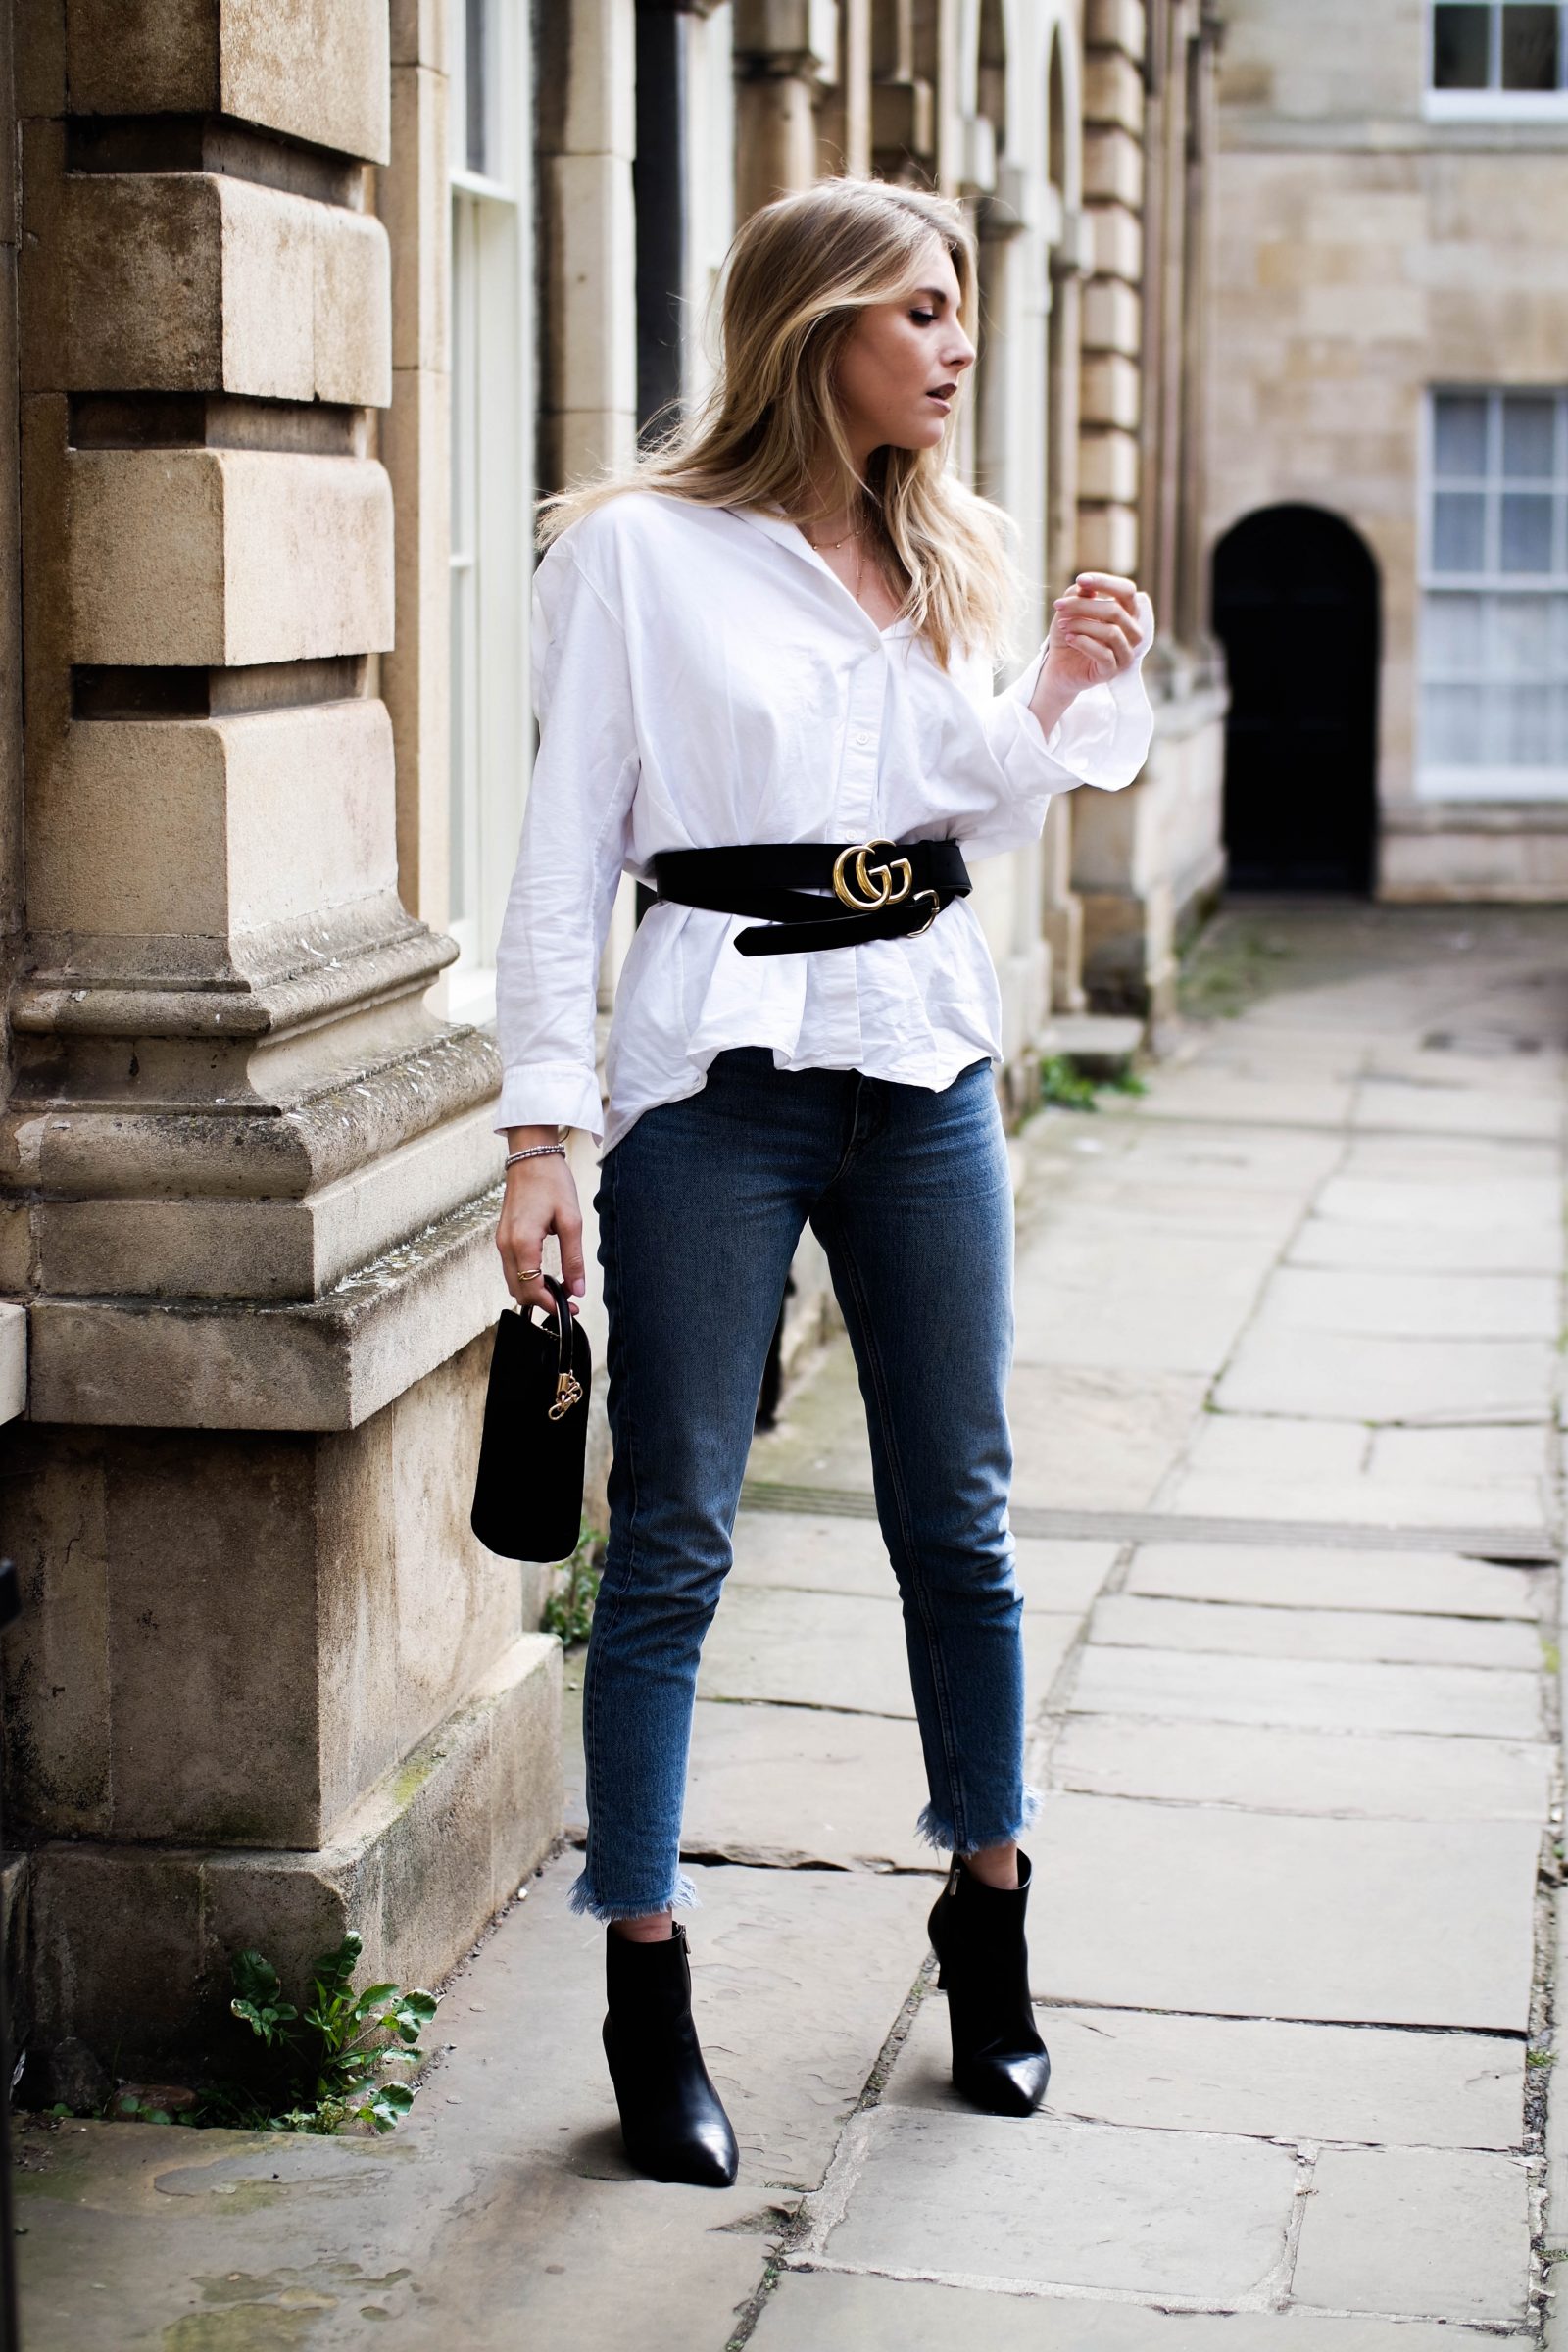 The New Way To Wear Your Statement Belt - Fashion Blogger Street Style